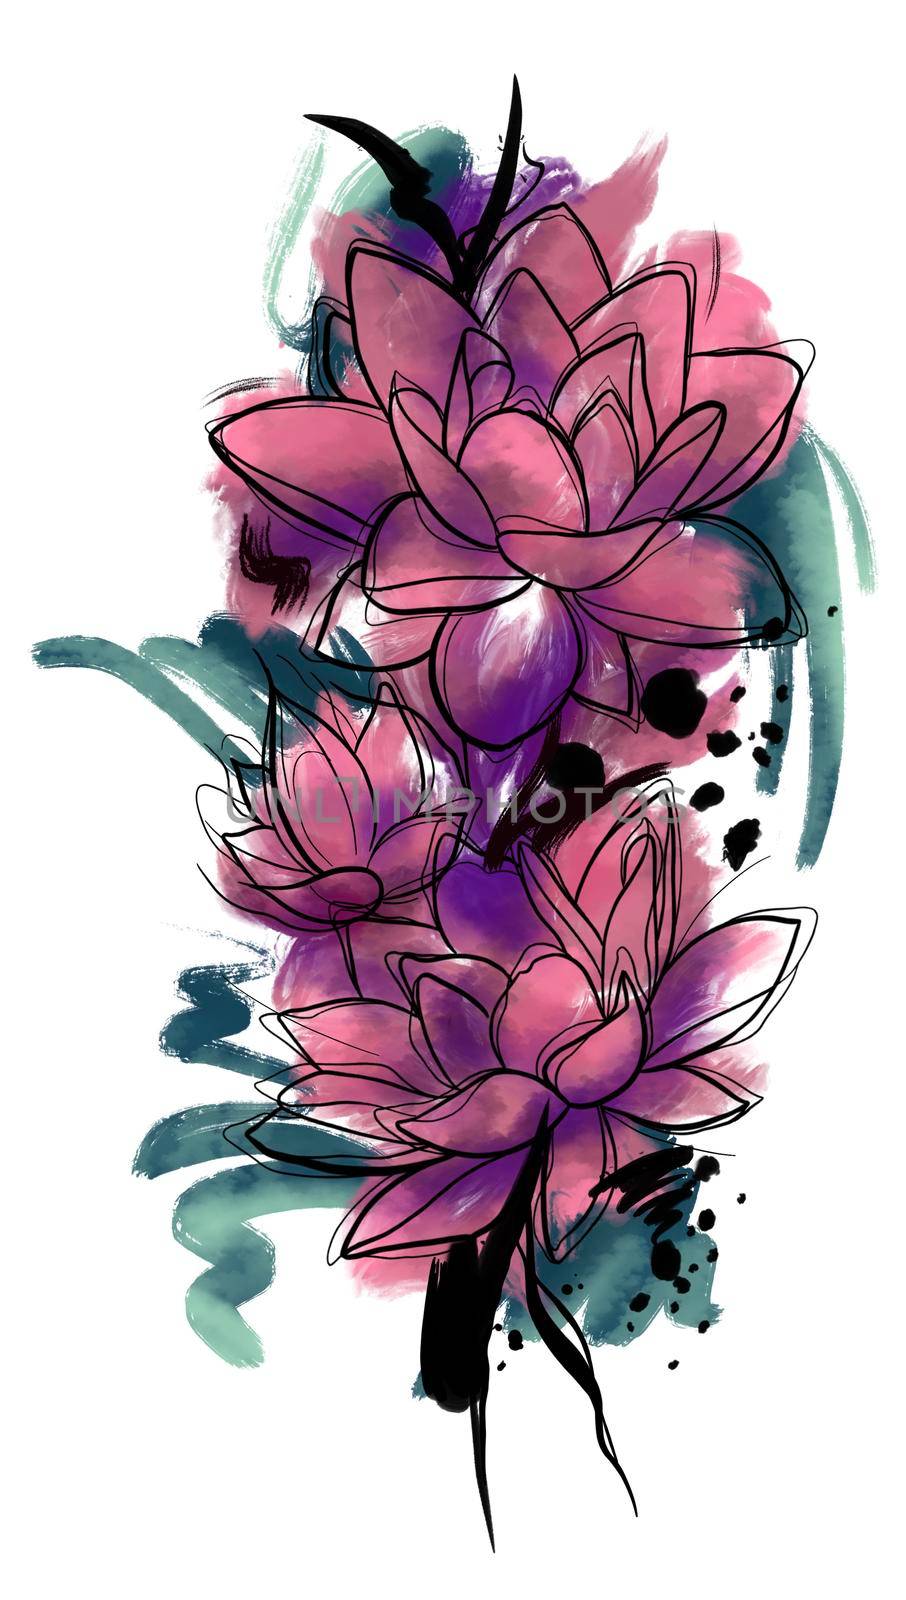 illustration of bright flowers with black outline in a watercolor style by kr0k0